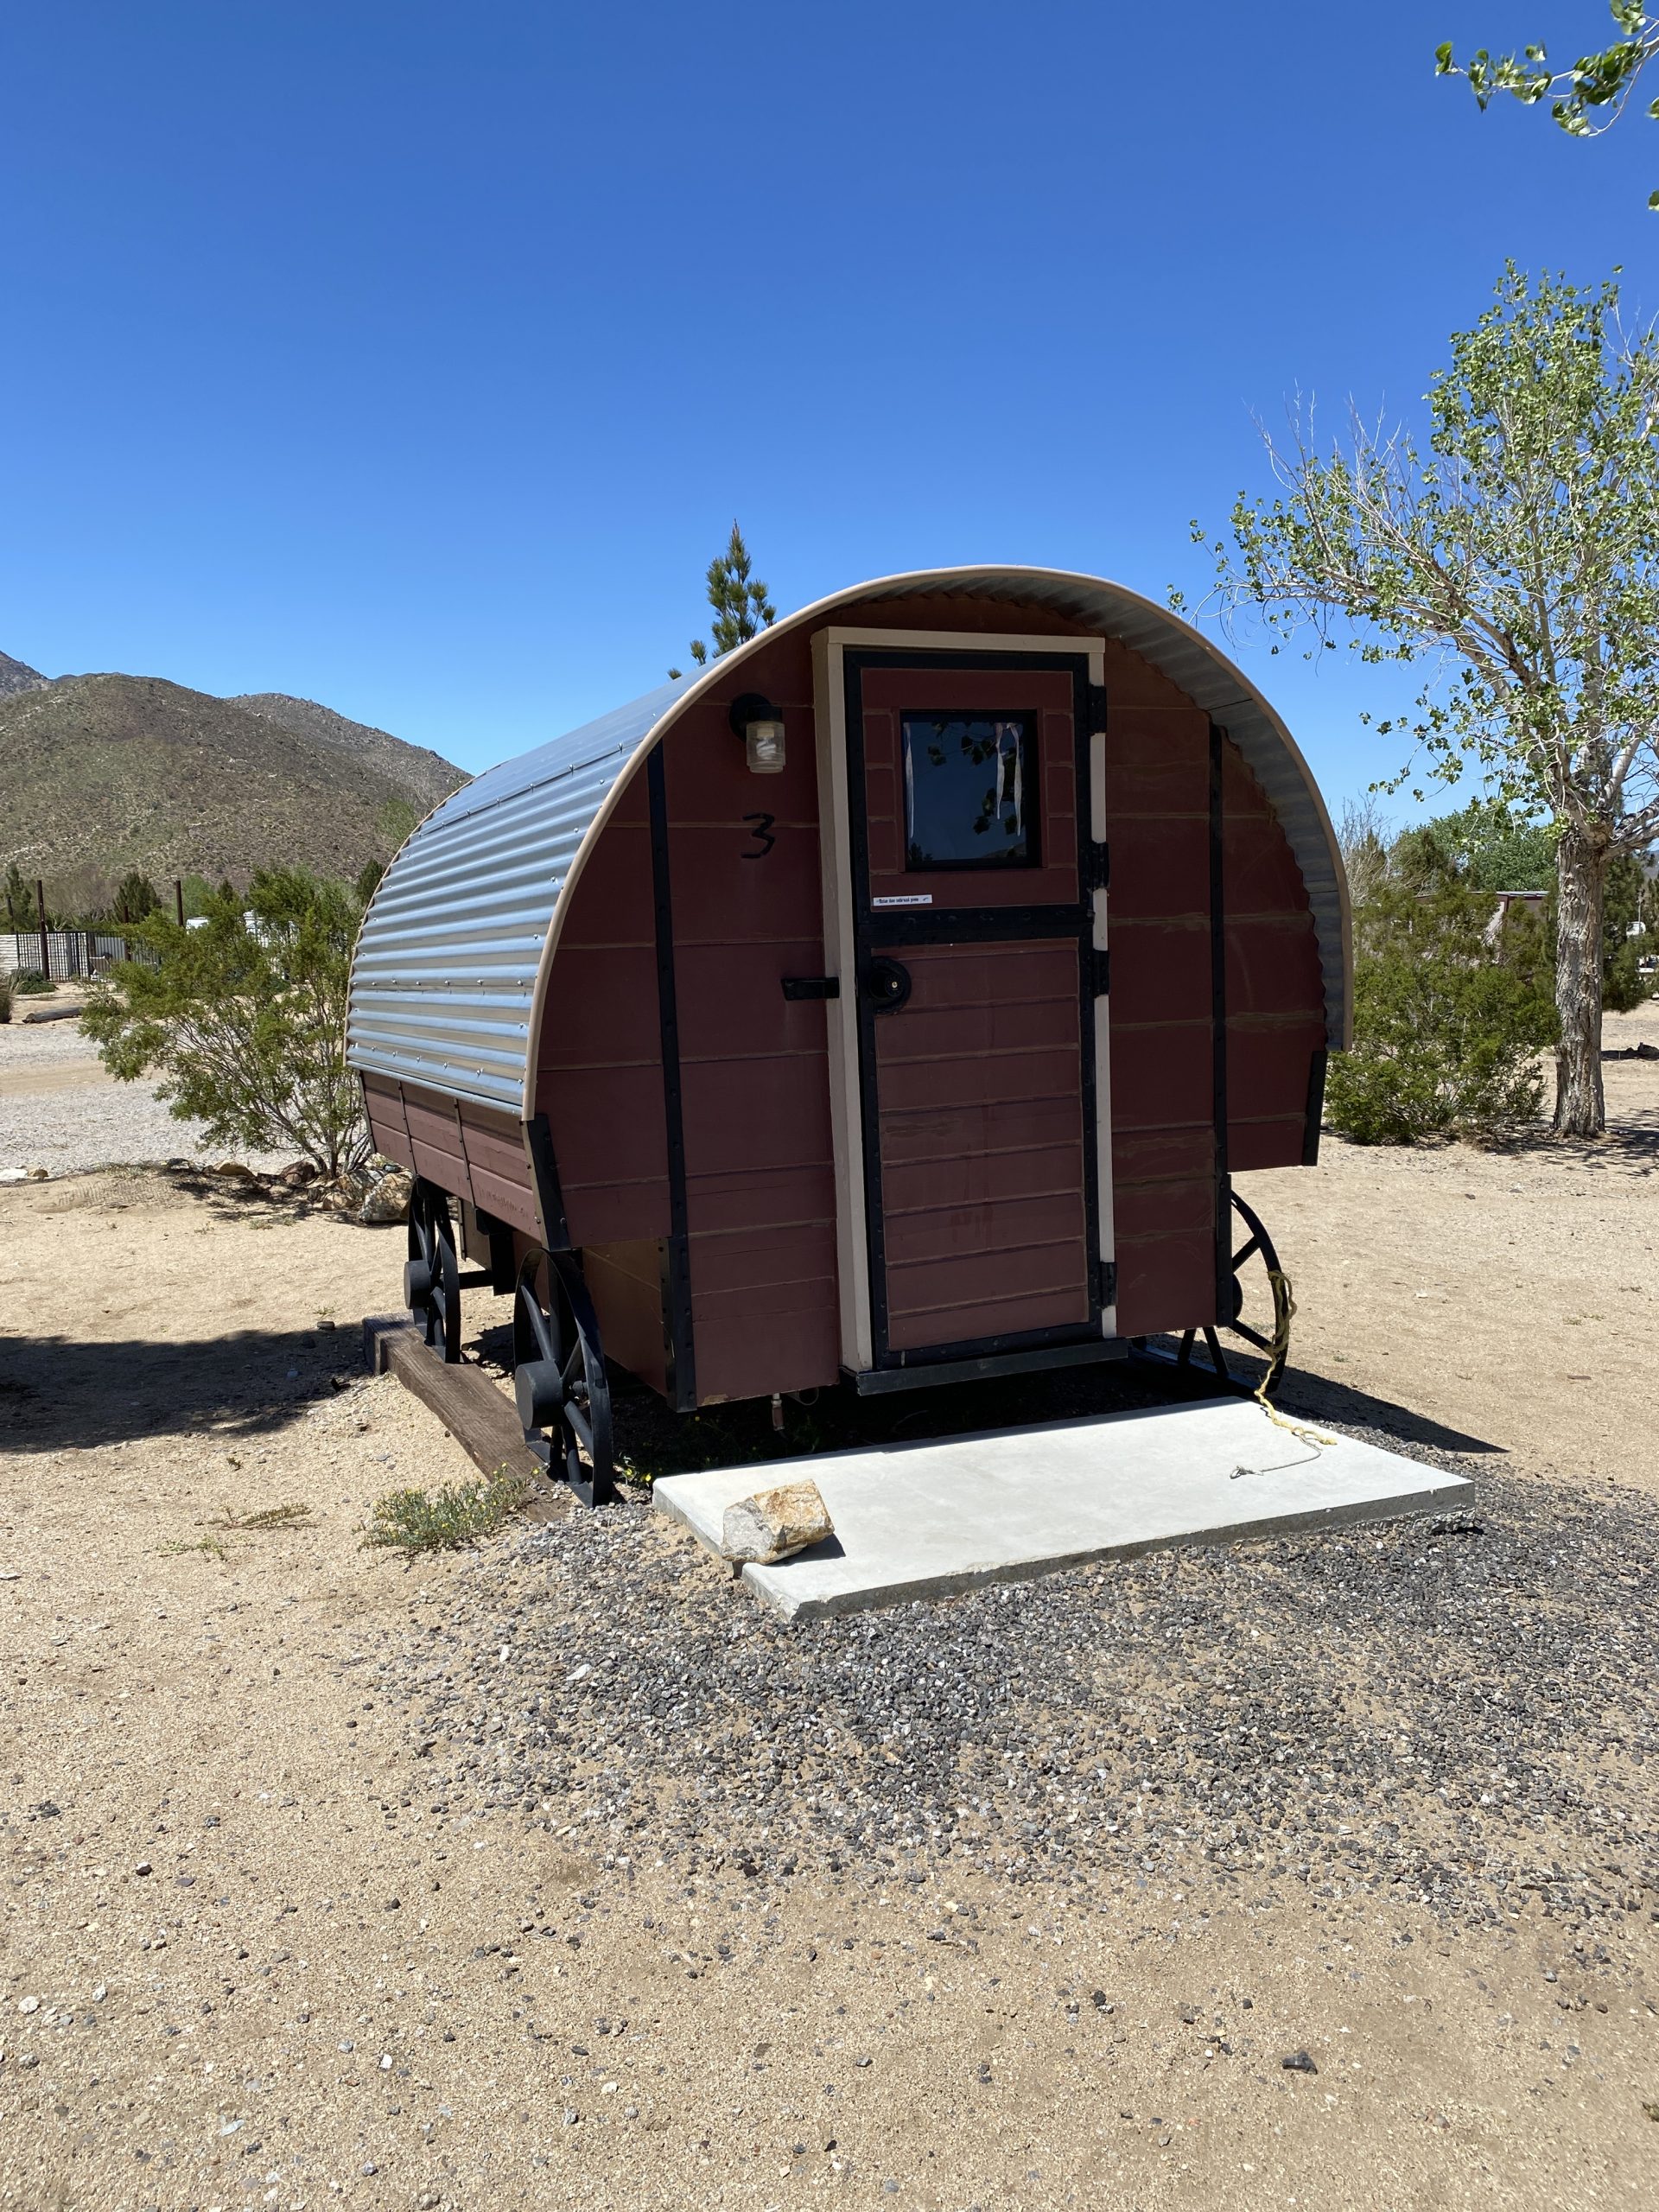 My sheep shed Mile 68.4 to Stagecoach RV Resort